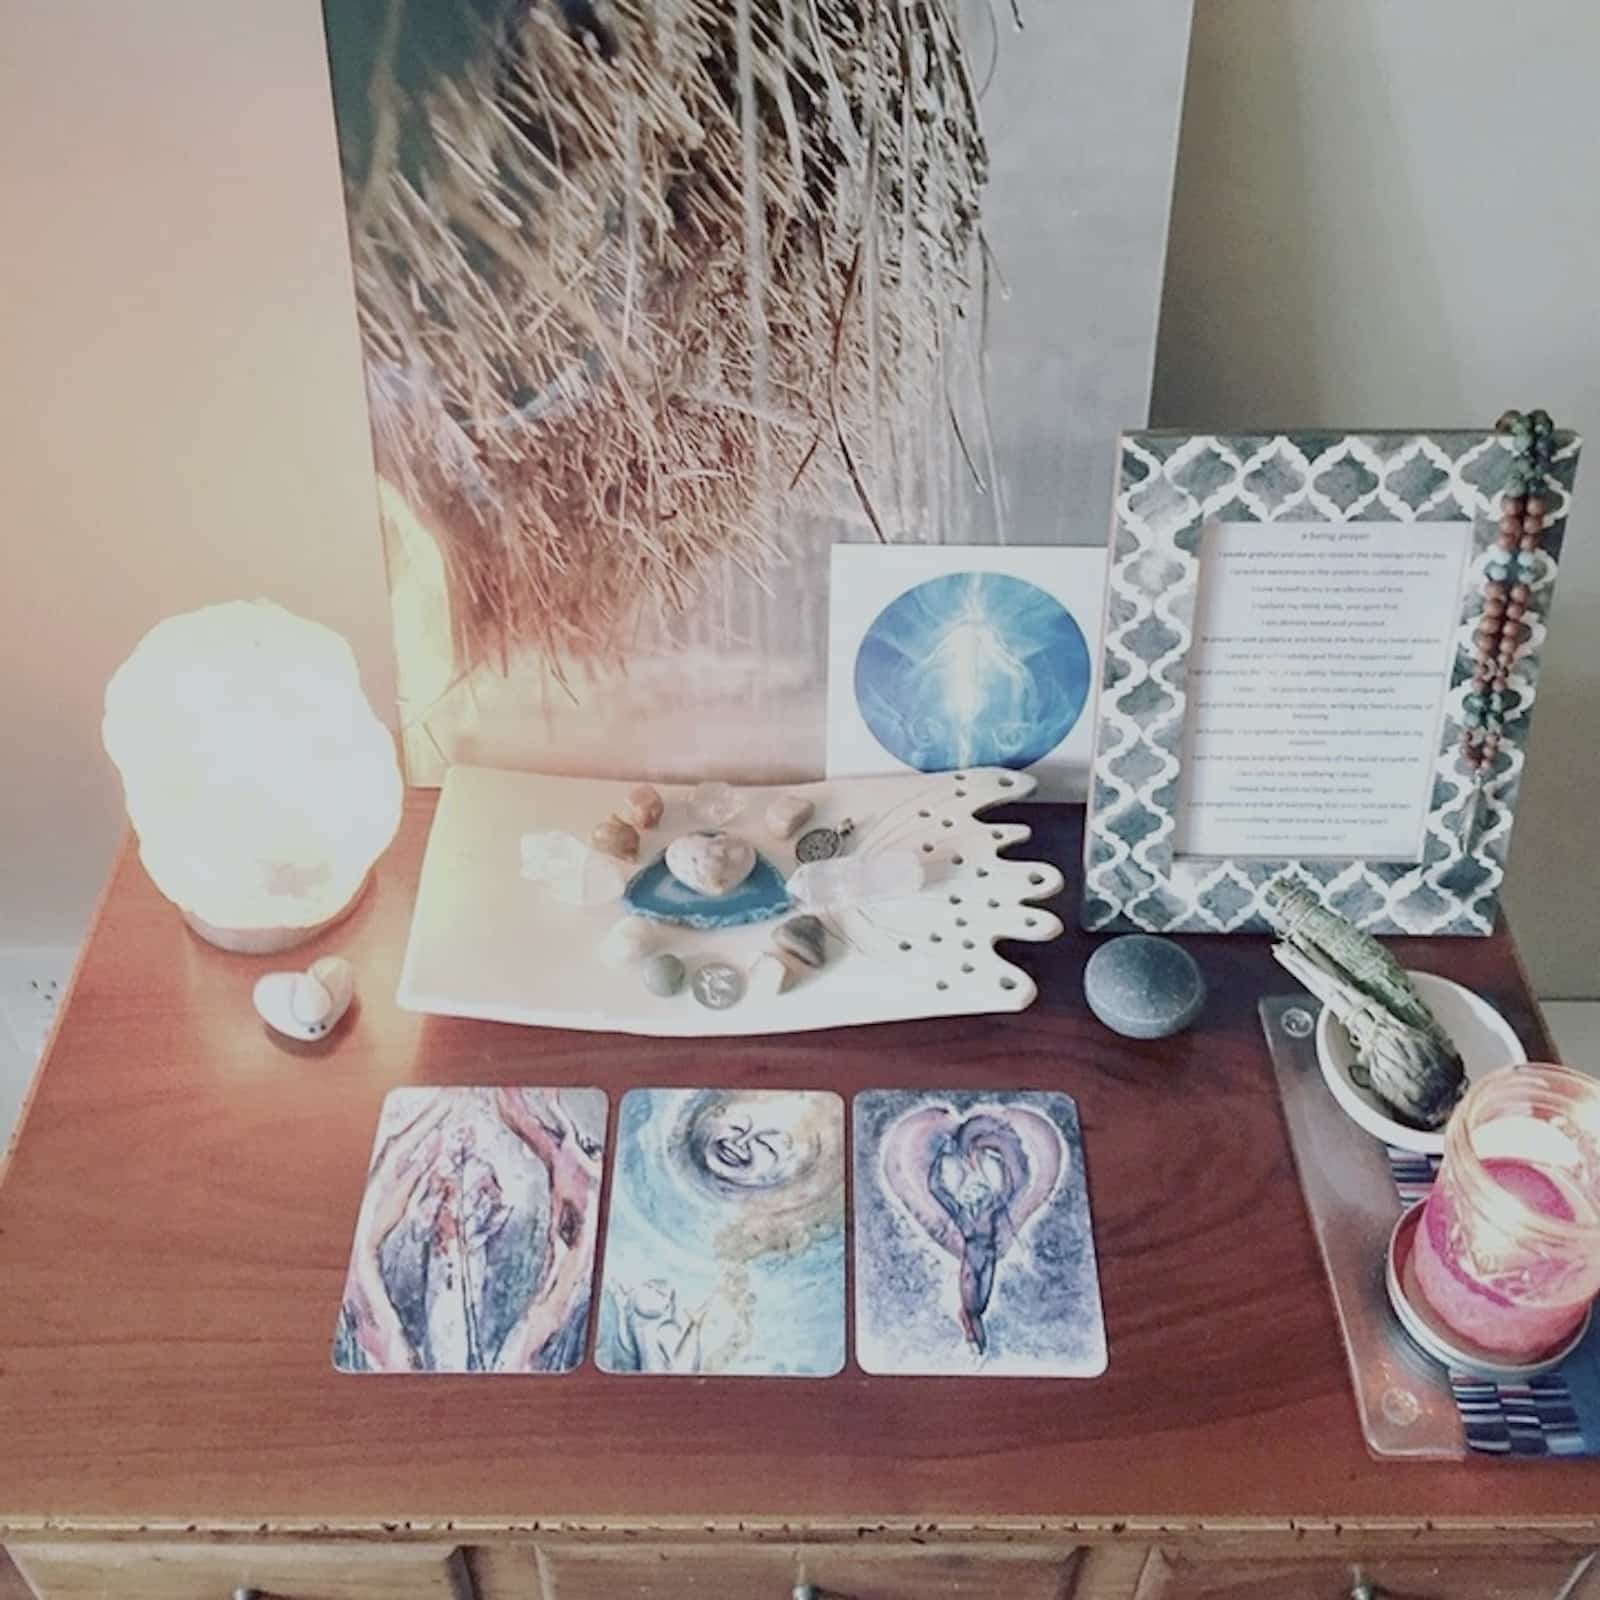 Erin Vivian's DIY home alter displaying a salt lamp, tarot cards, a tray of crystals, and other images and objects that are meaningful to her.